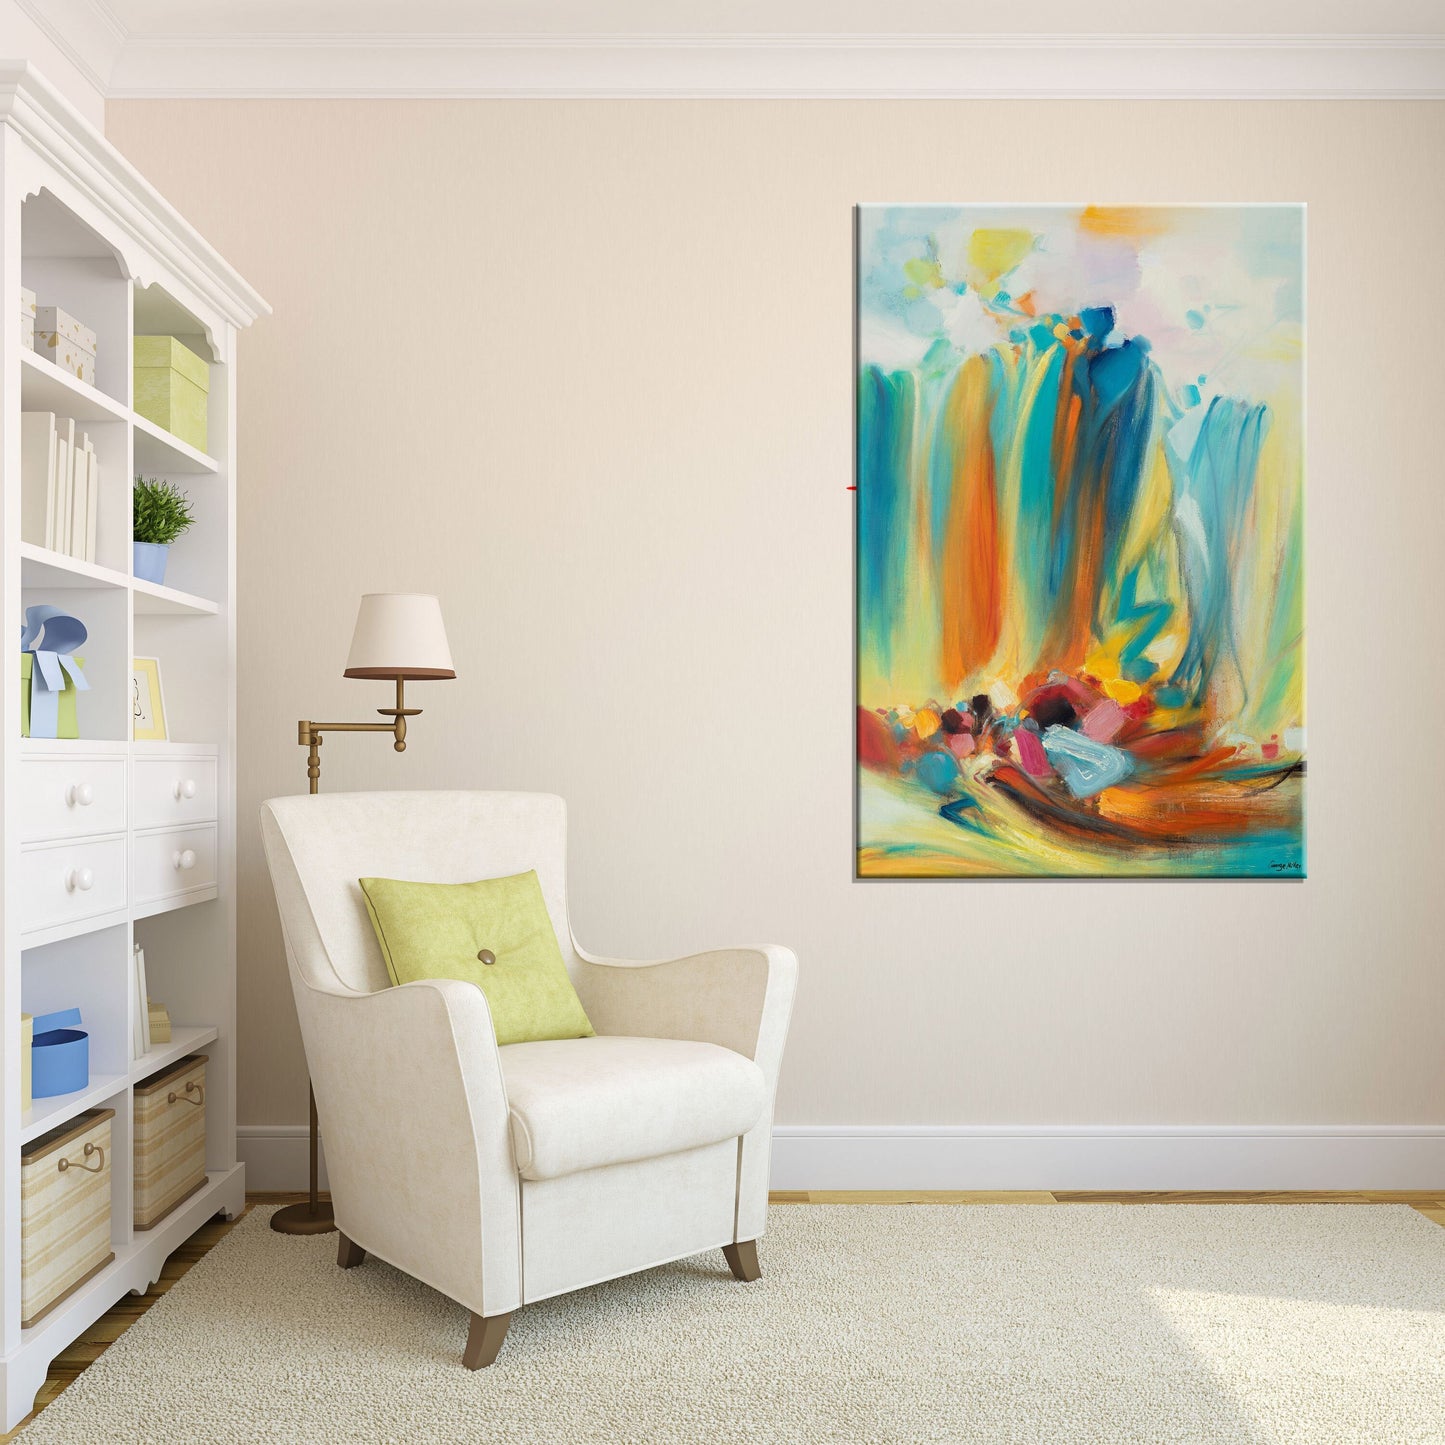 Contemporary Masterpiece: Original Abstract Oil Painting - 32x48 inches Ready to Hang - Enhance Your Space with Artistic Flair